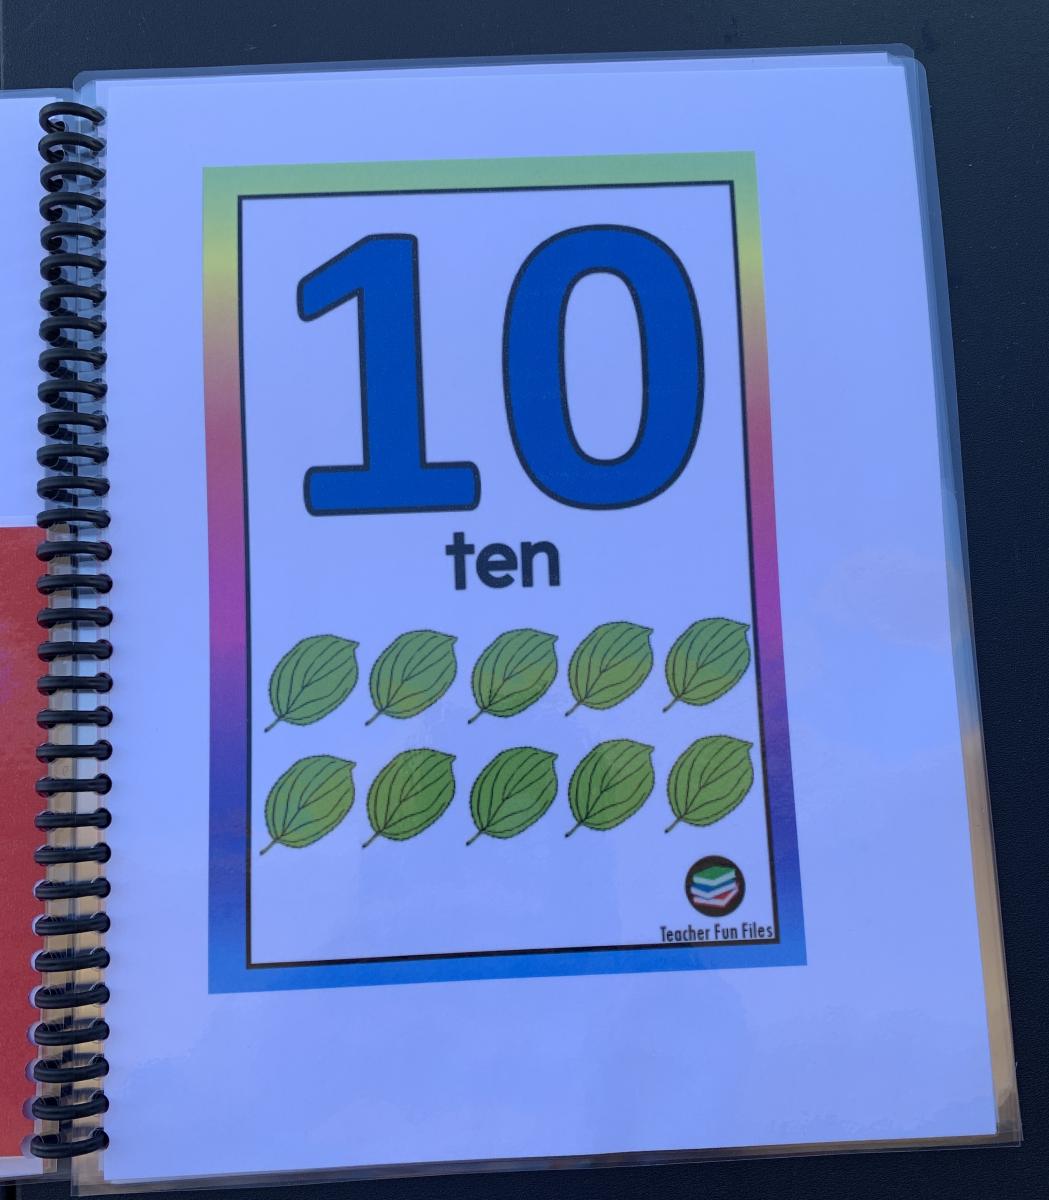 Page of book showing the number 10 with image of 10 green leaves